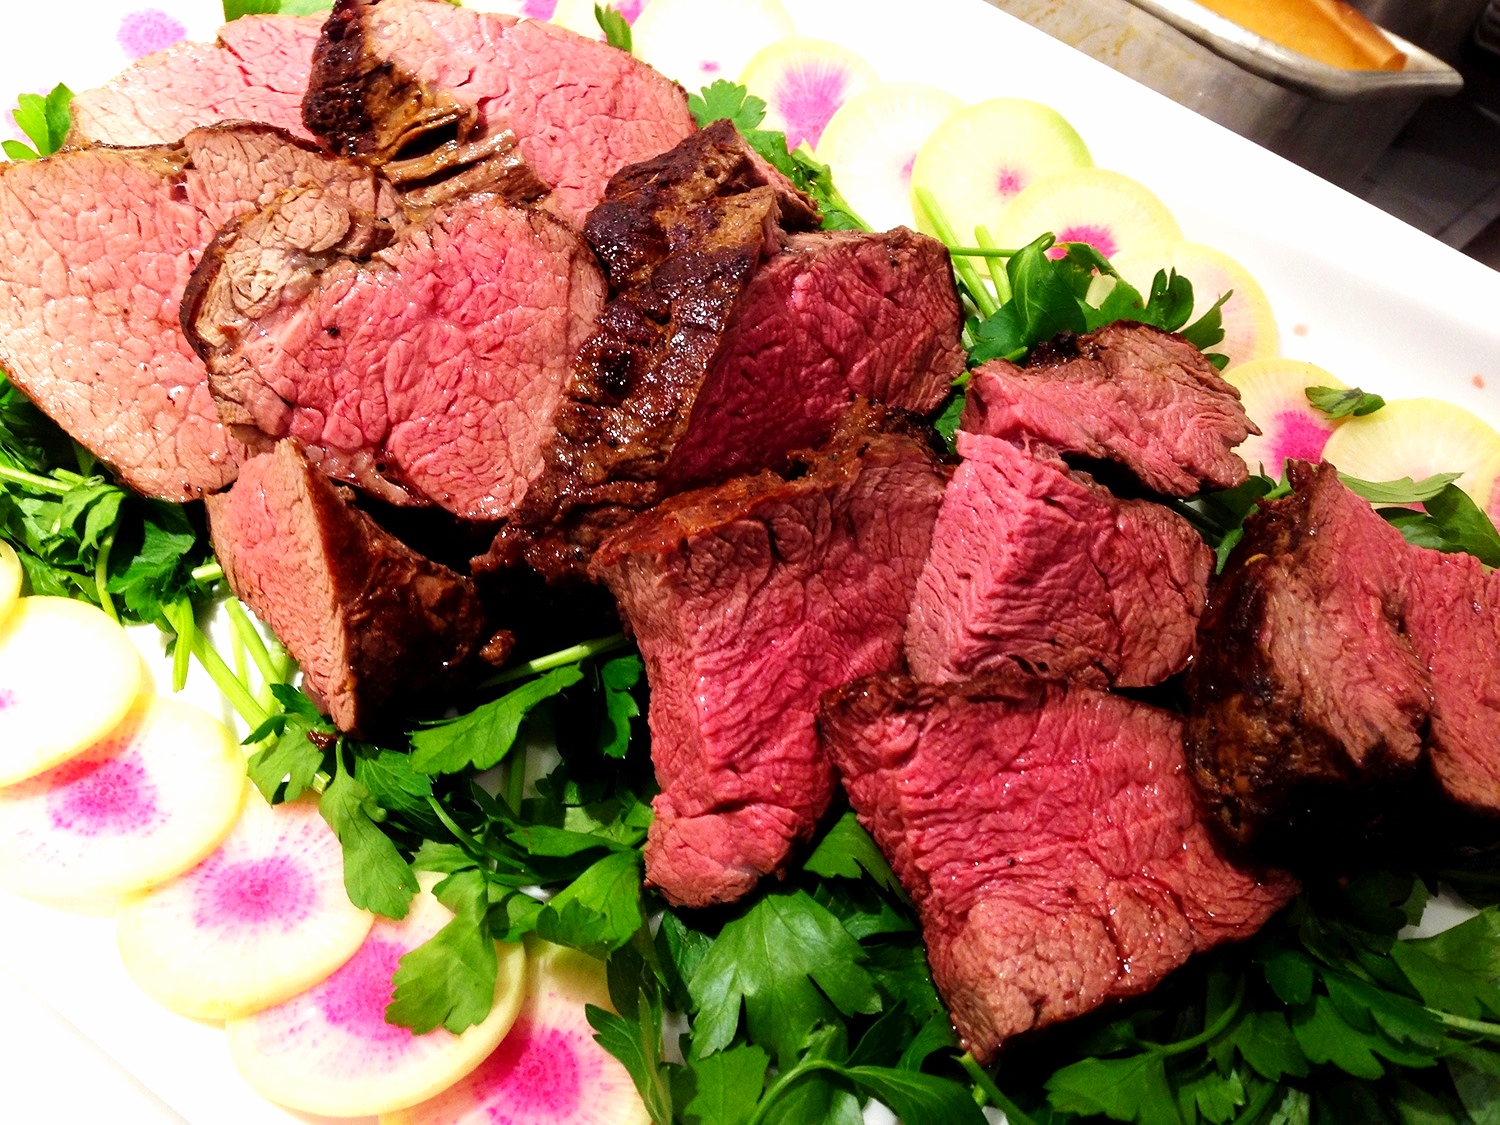 Seared herbed kosher for Passover beef tenderloin on parsley and watermelon radish salad